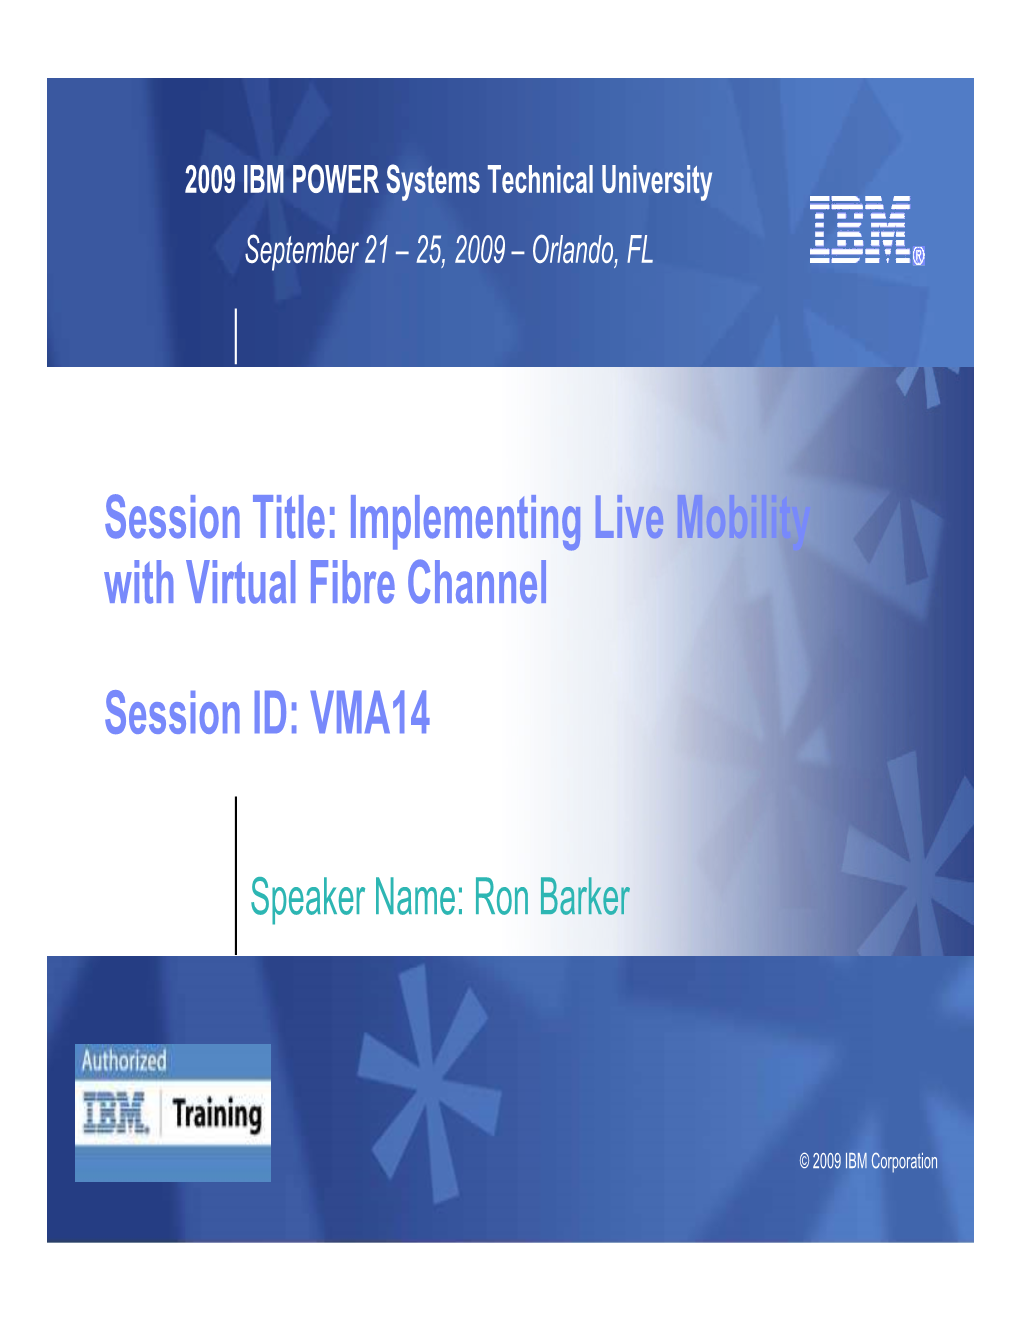 Session Title: Implementing Live Mobility with Virtual Fibre Channel